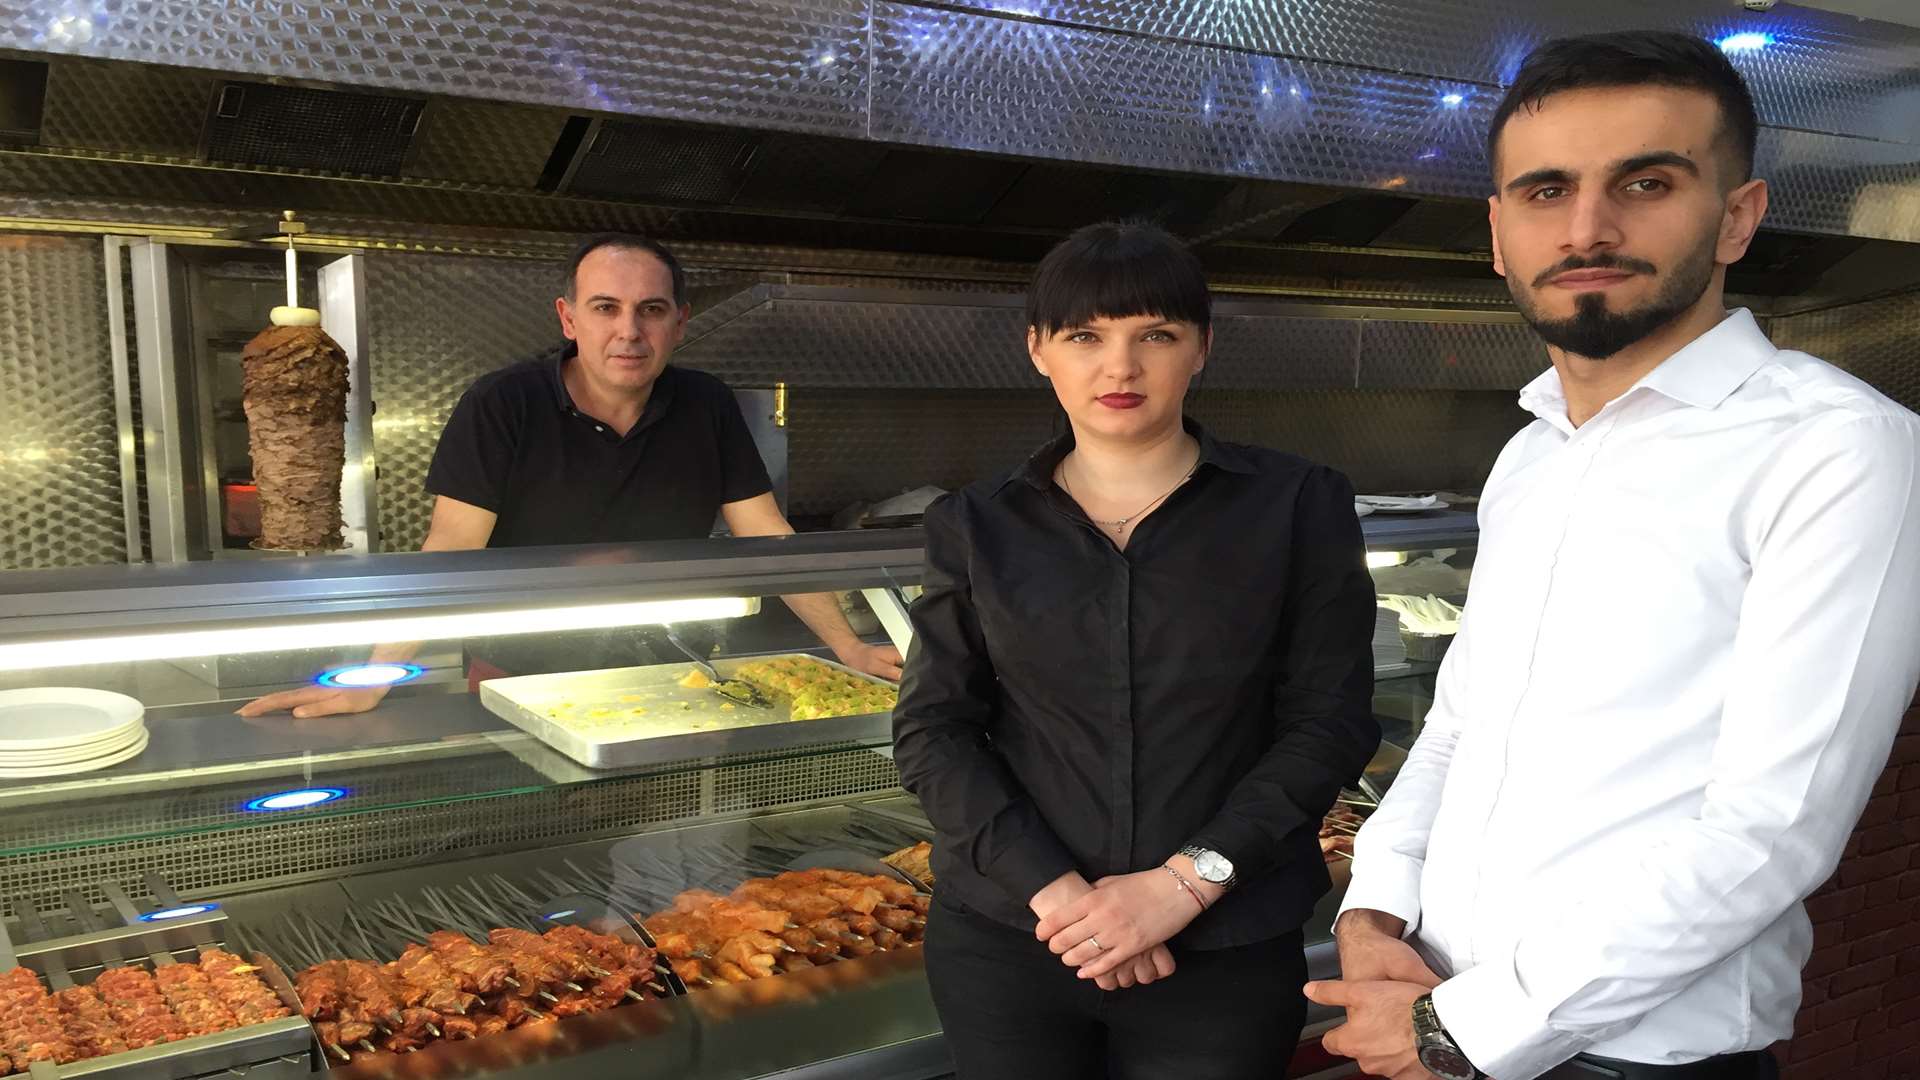 Sultan Sofrai, in New Road, Gravesend, which was broken into. restaurant owner Mehmet Celik, 22, (right) with head chef Hassan Yilmaz and waitress Popescu Alexandra